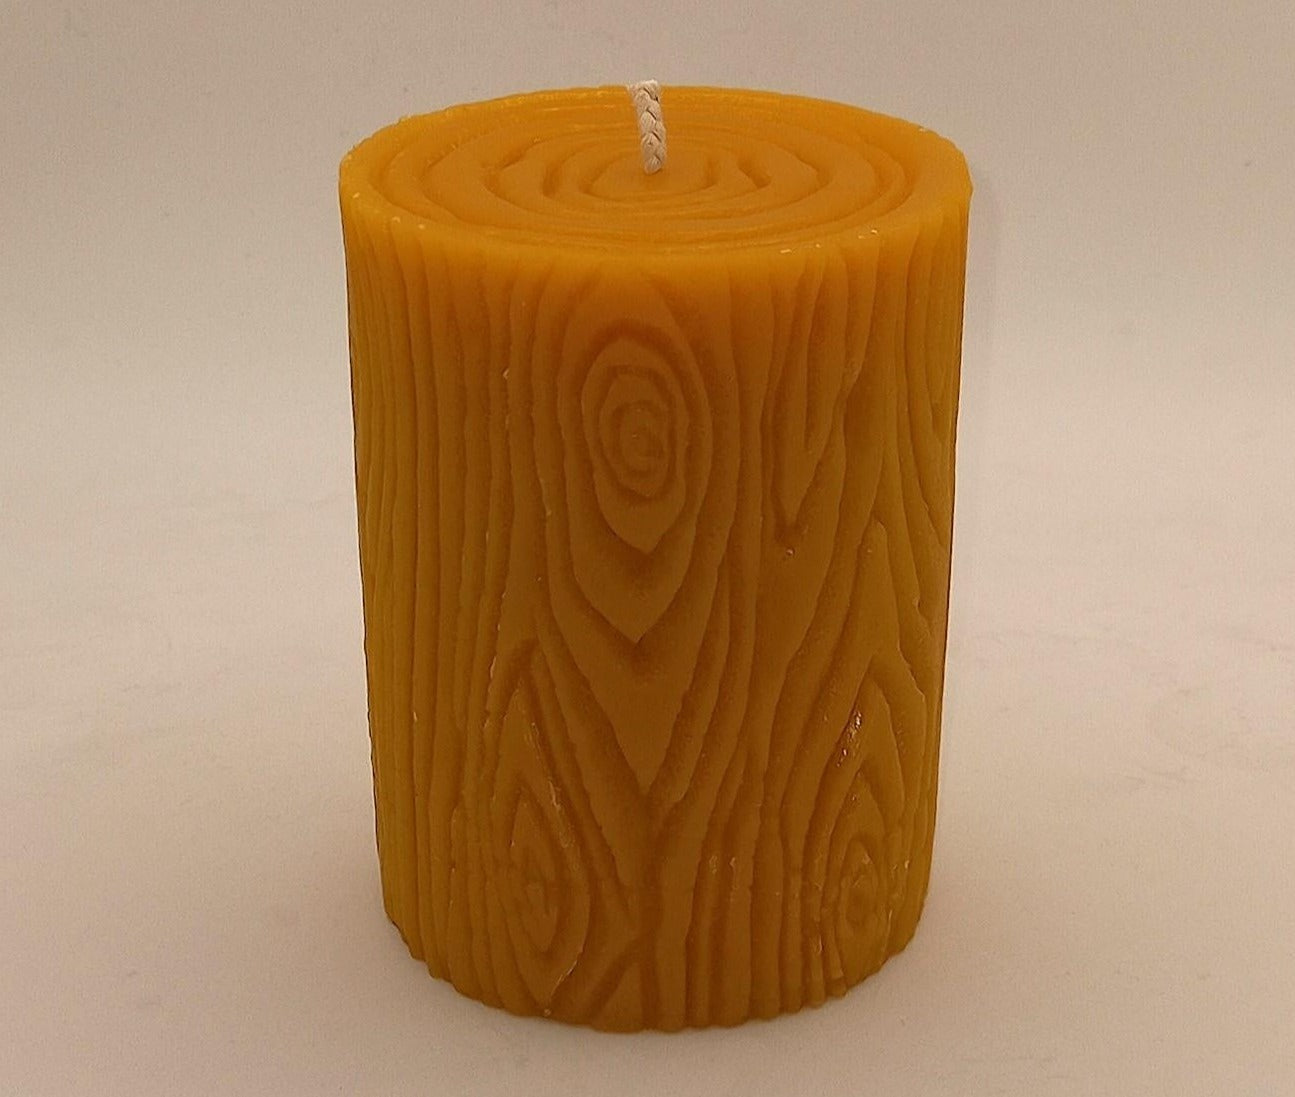 La Bûche Beeswax Candle by Pure Abeille, 1